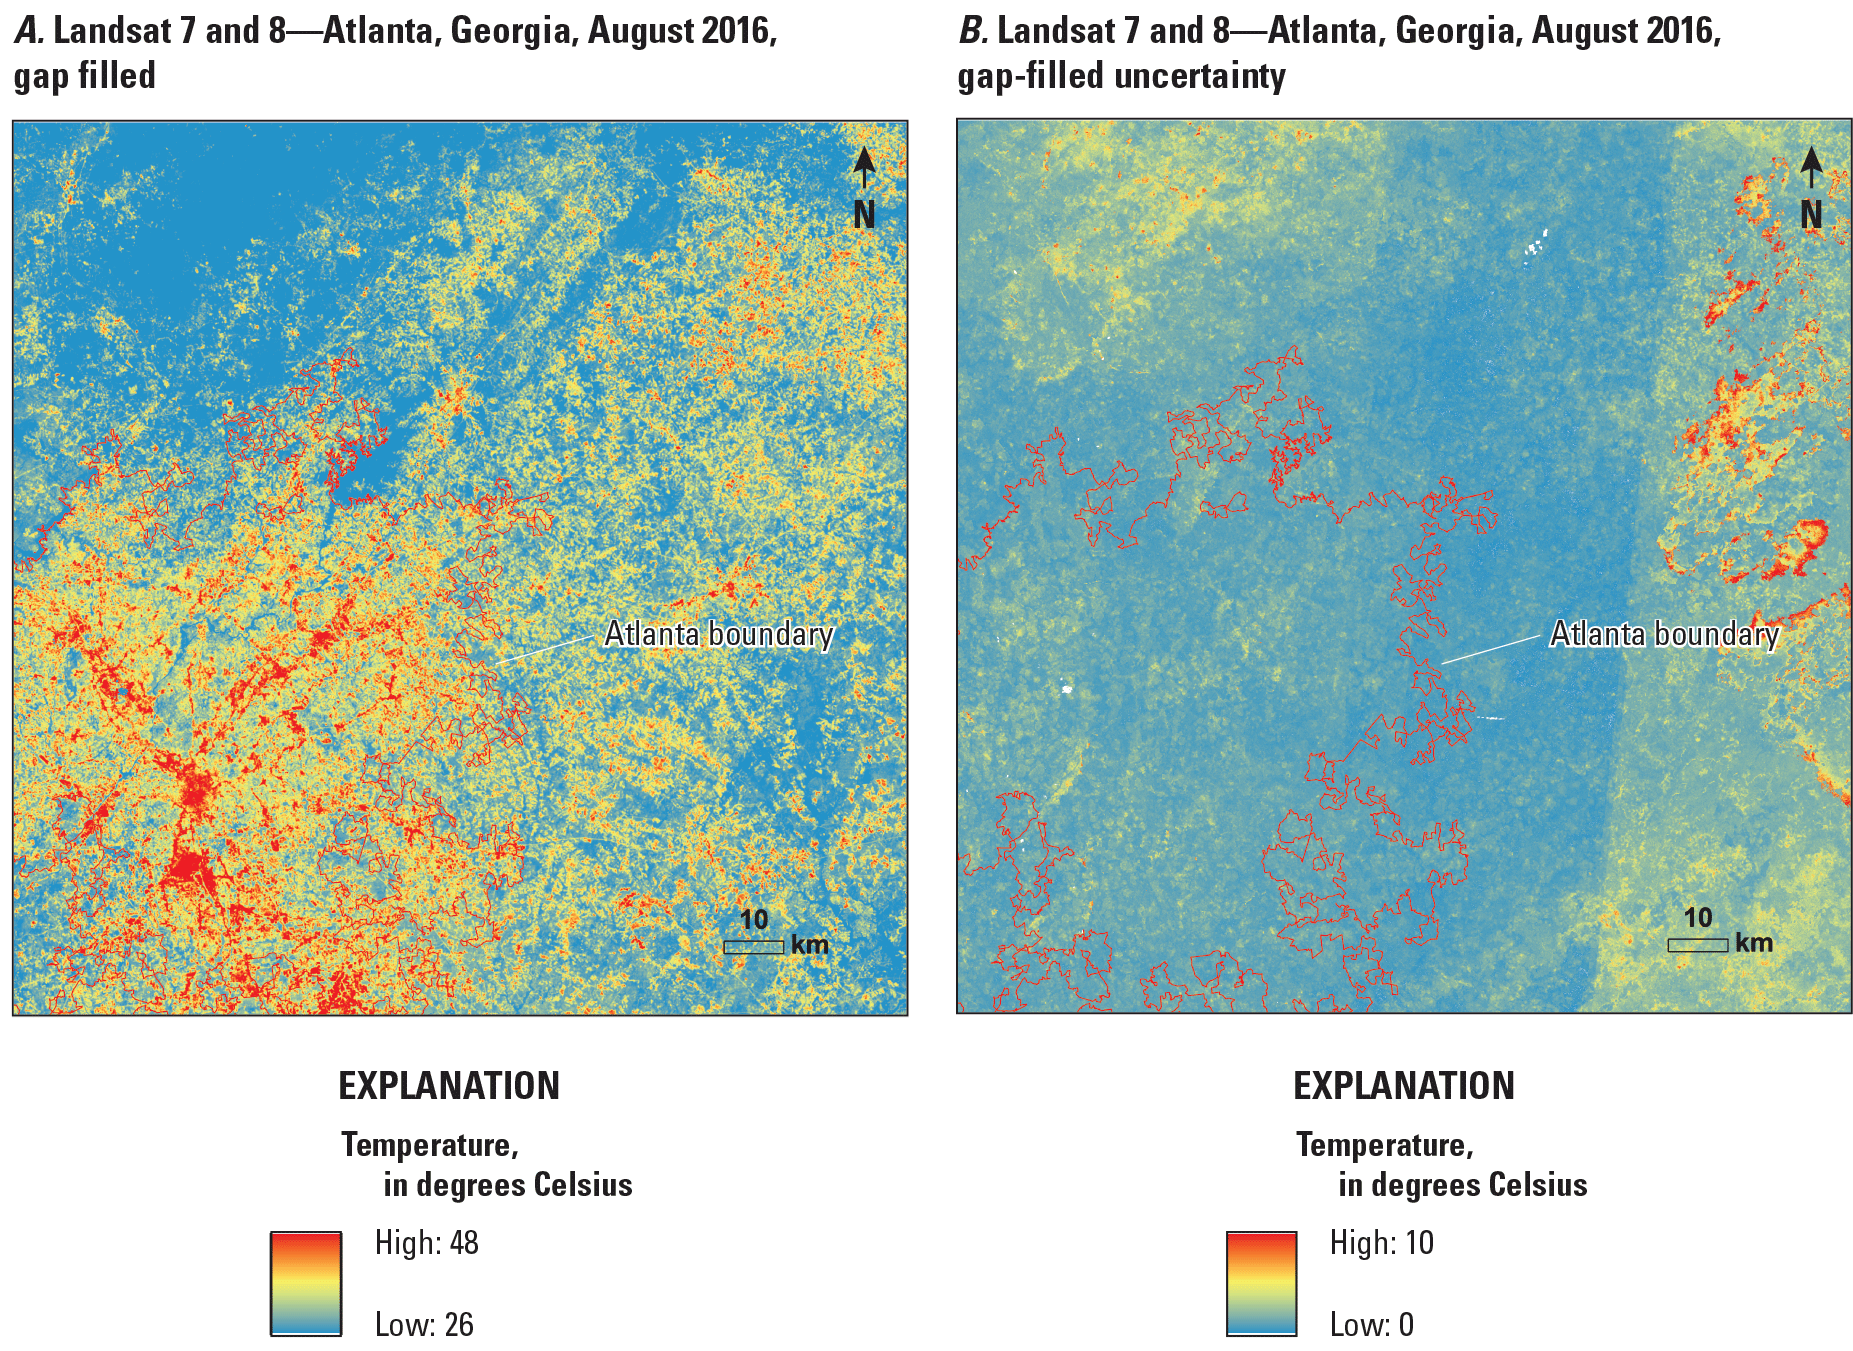 Gap-filled Landsat surface temperature and uncertainty map for Atlanta, Georgia, August
                        2016.